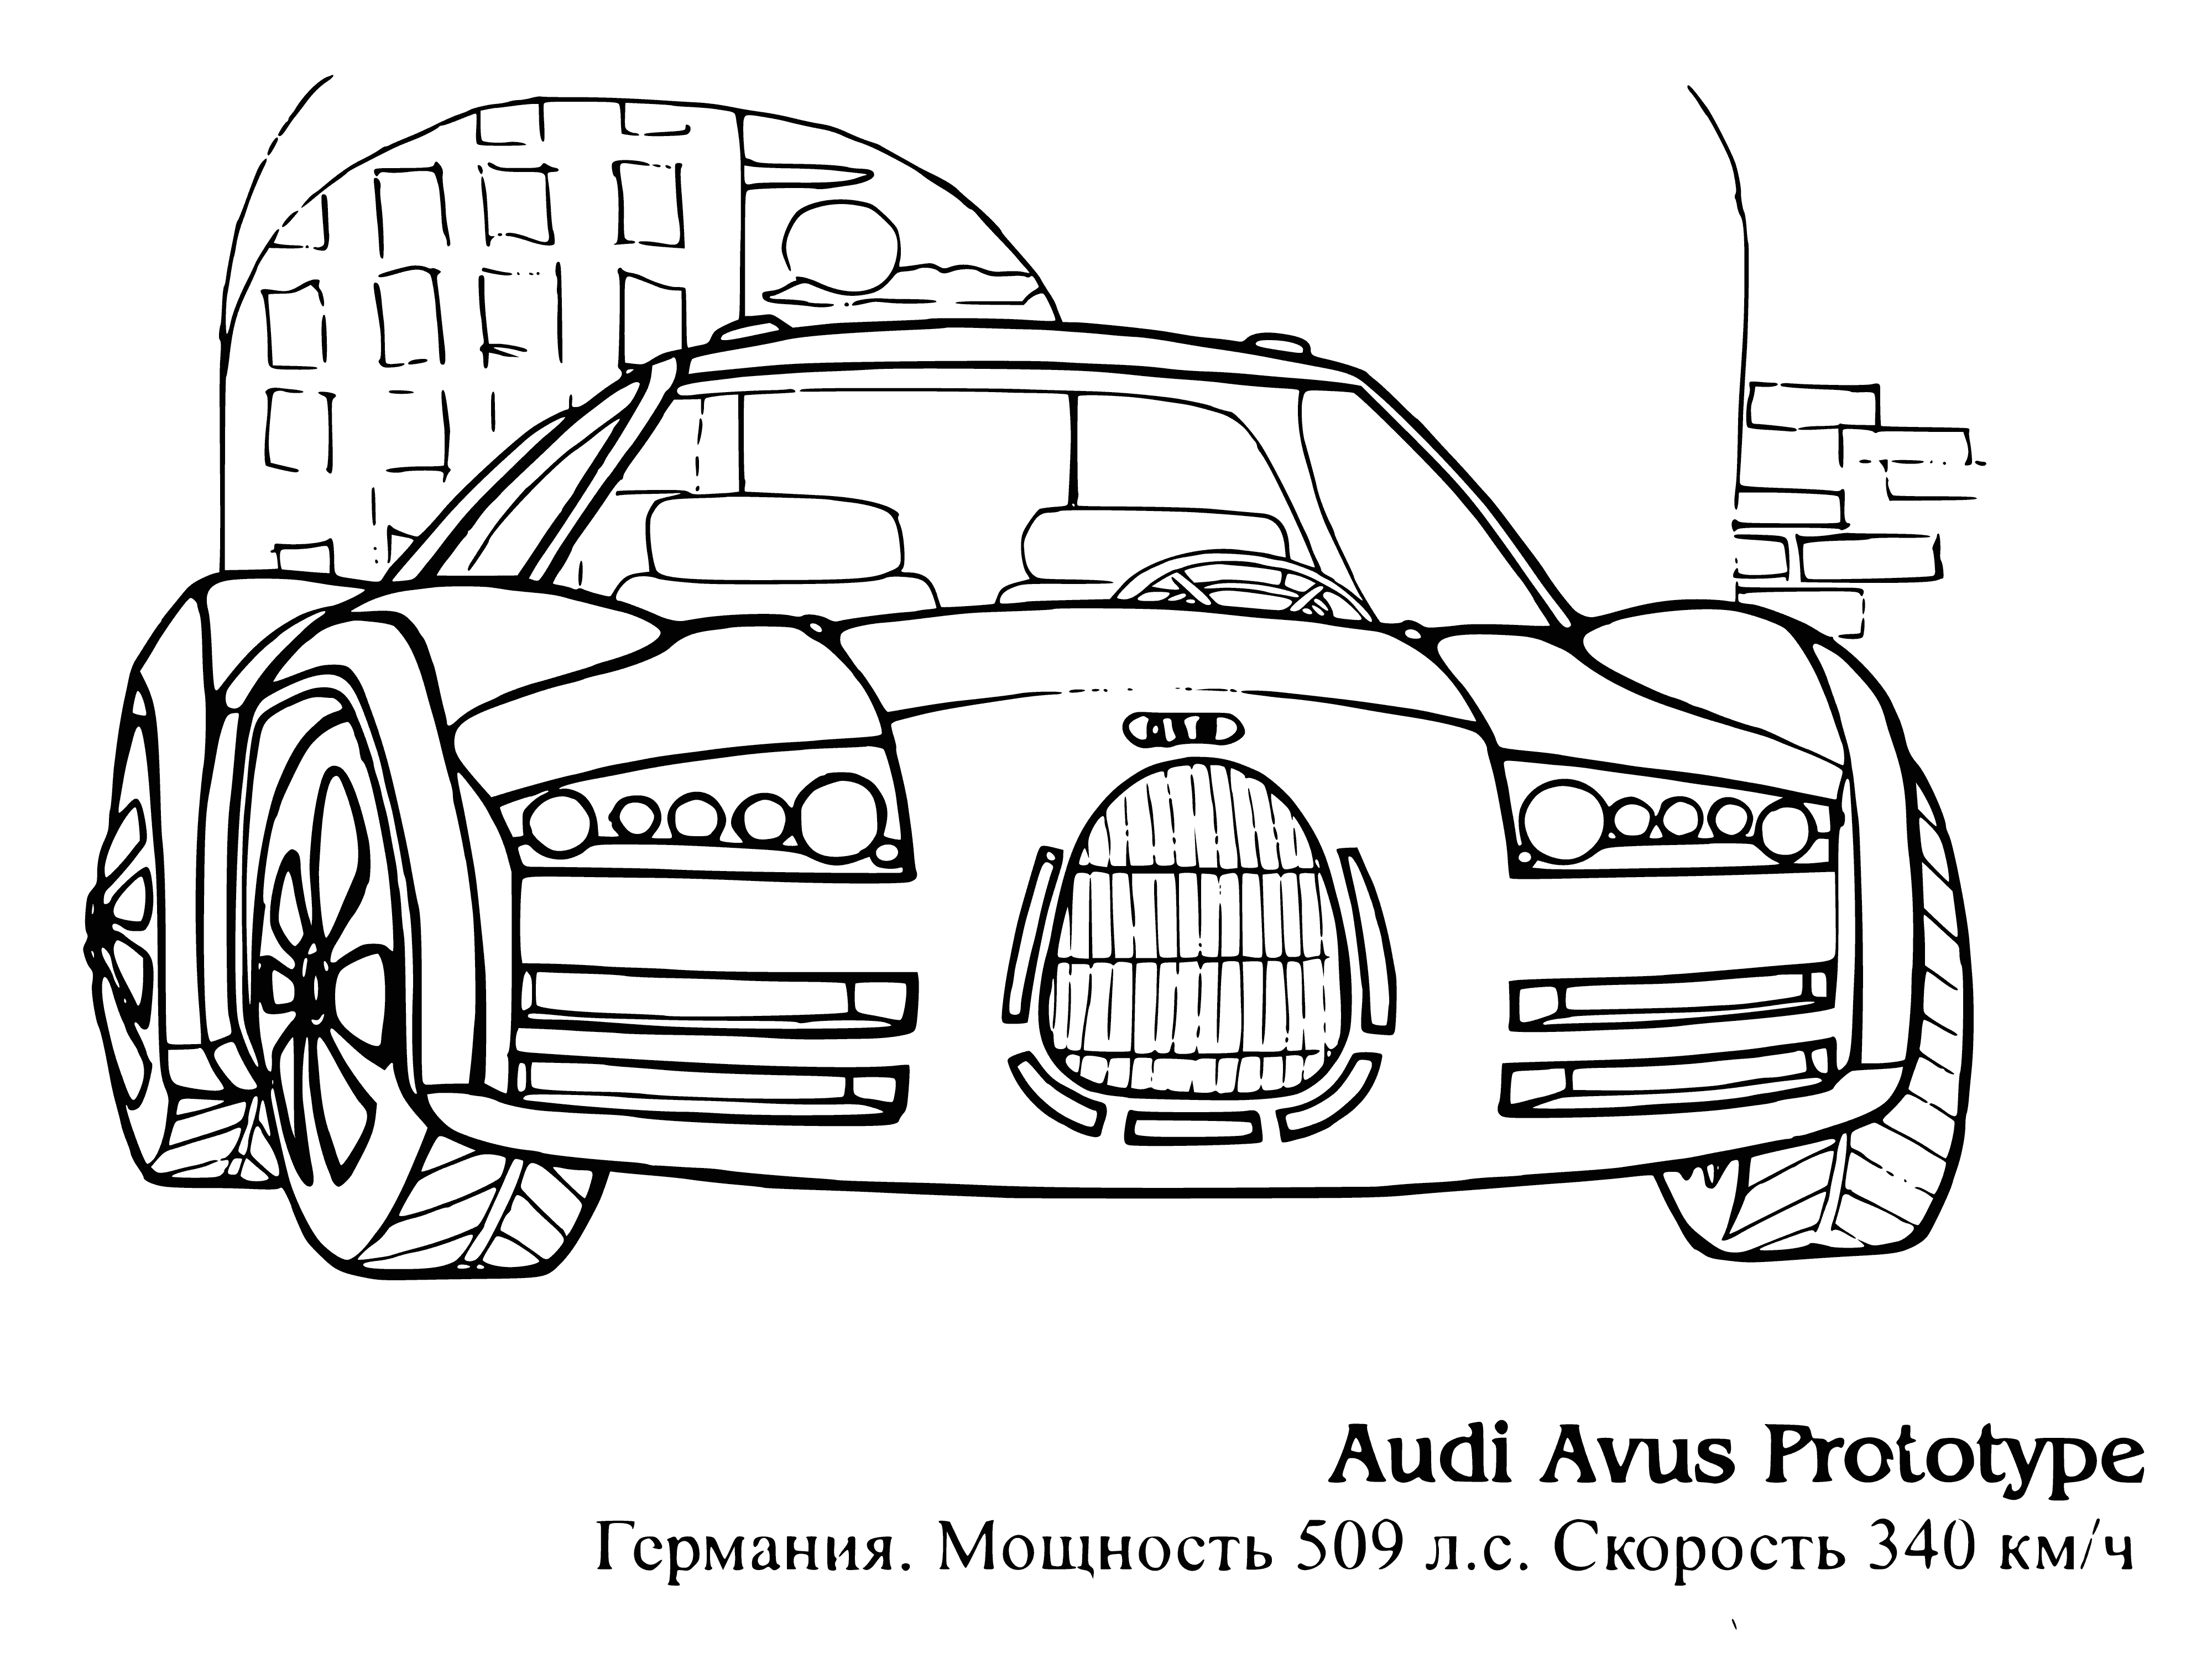 coloring page: Audi Grandfather Prototype is a two-seater sports car with a long hood and short rear, white/black color, chrome bumpers/side mirrors, black grille/Audi logo, and black alloy wheels.